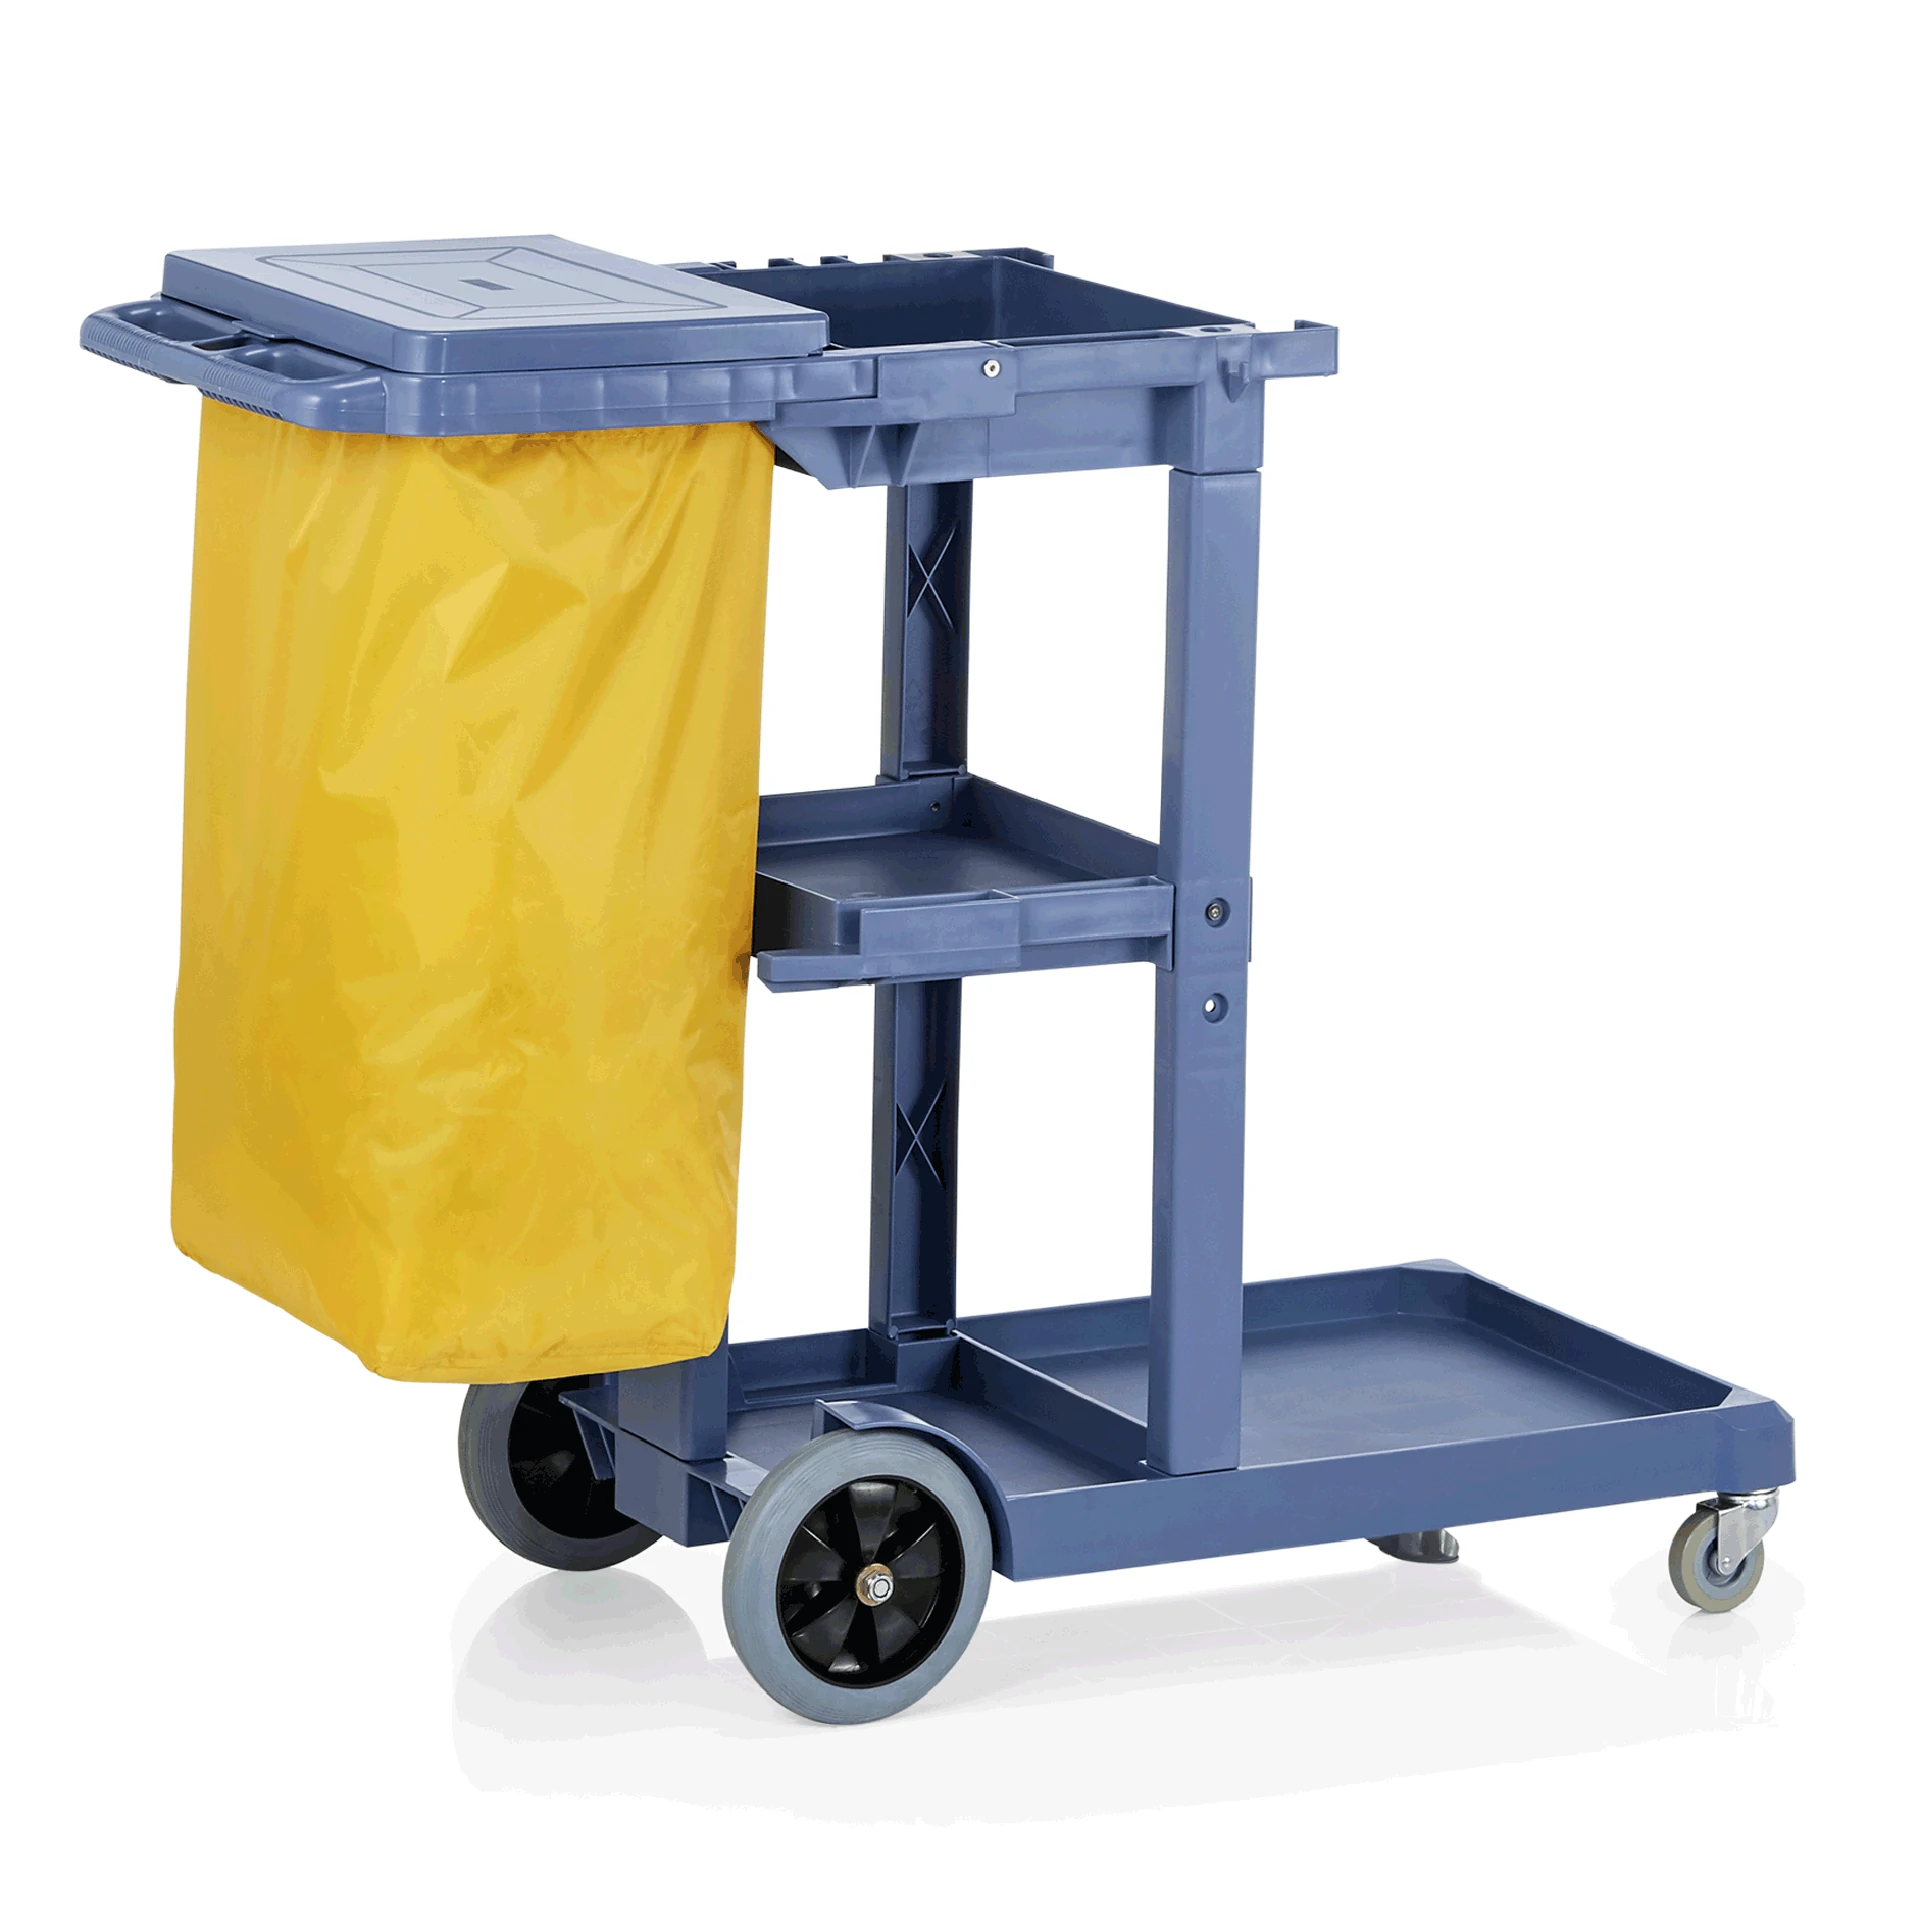 Janitorial cleaning trolley